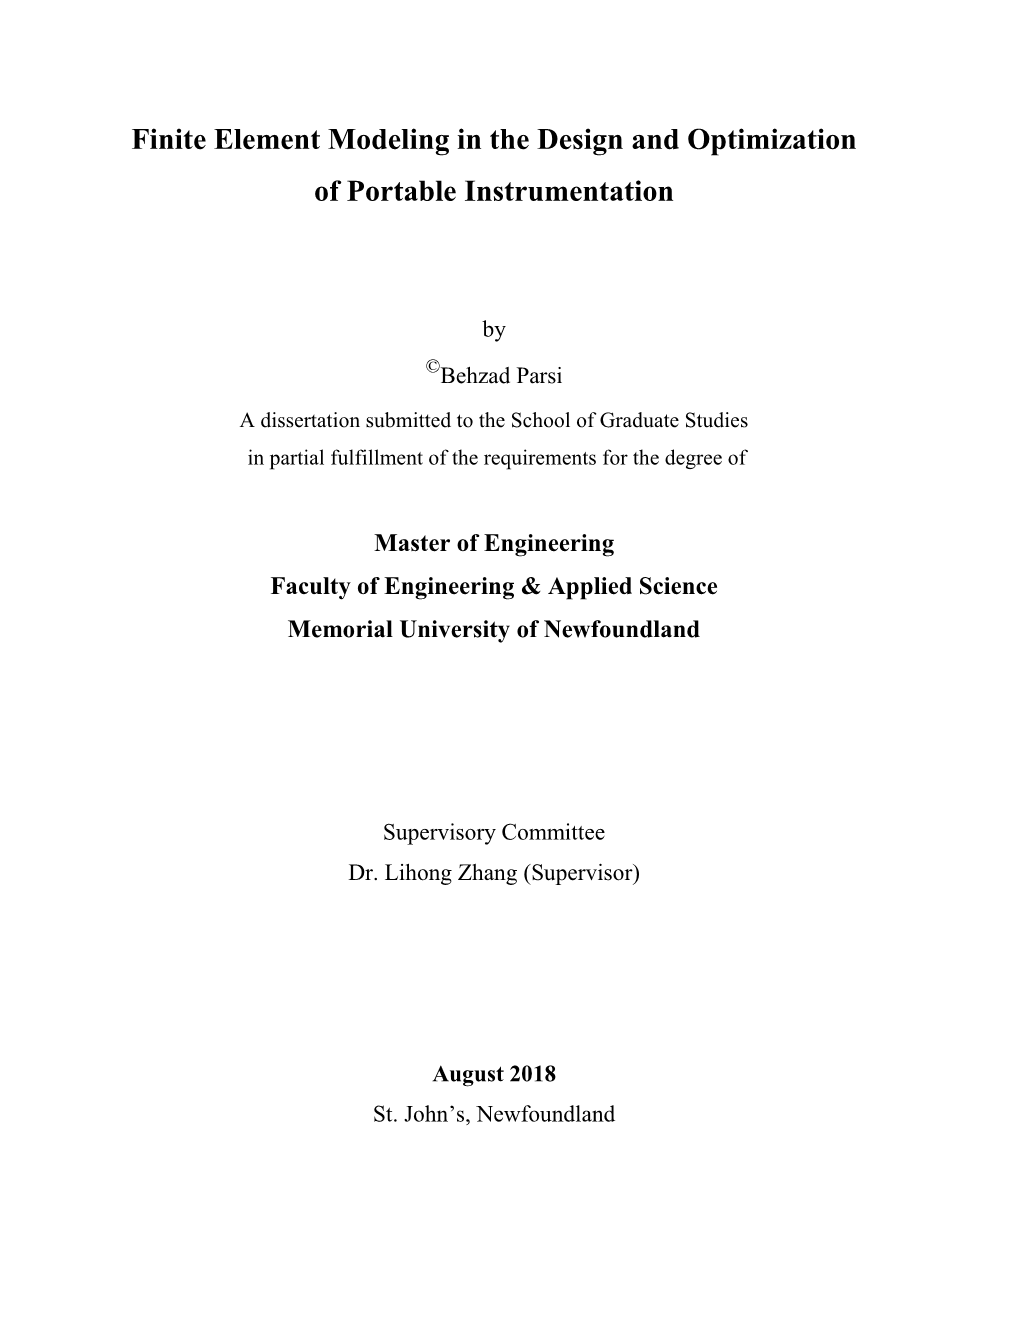 Finite Element Modeling in the Design and Optimization of Portable Instrumentation